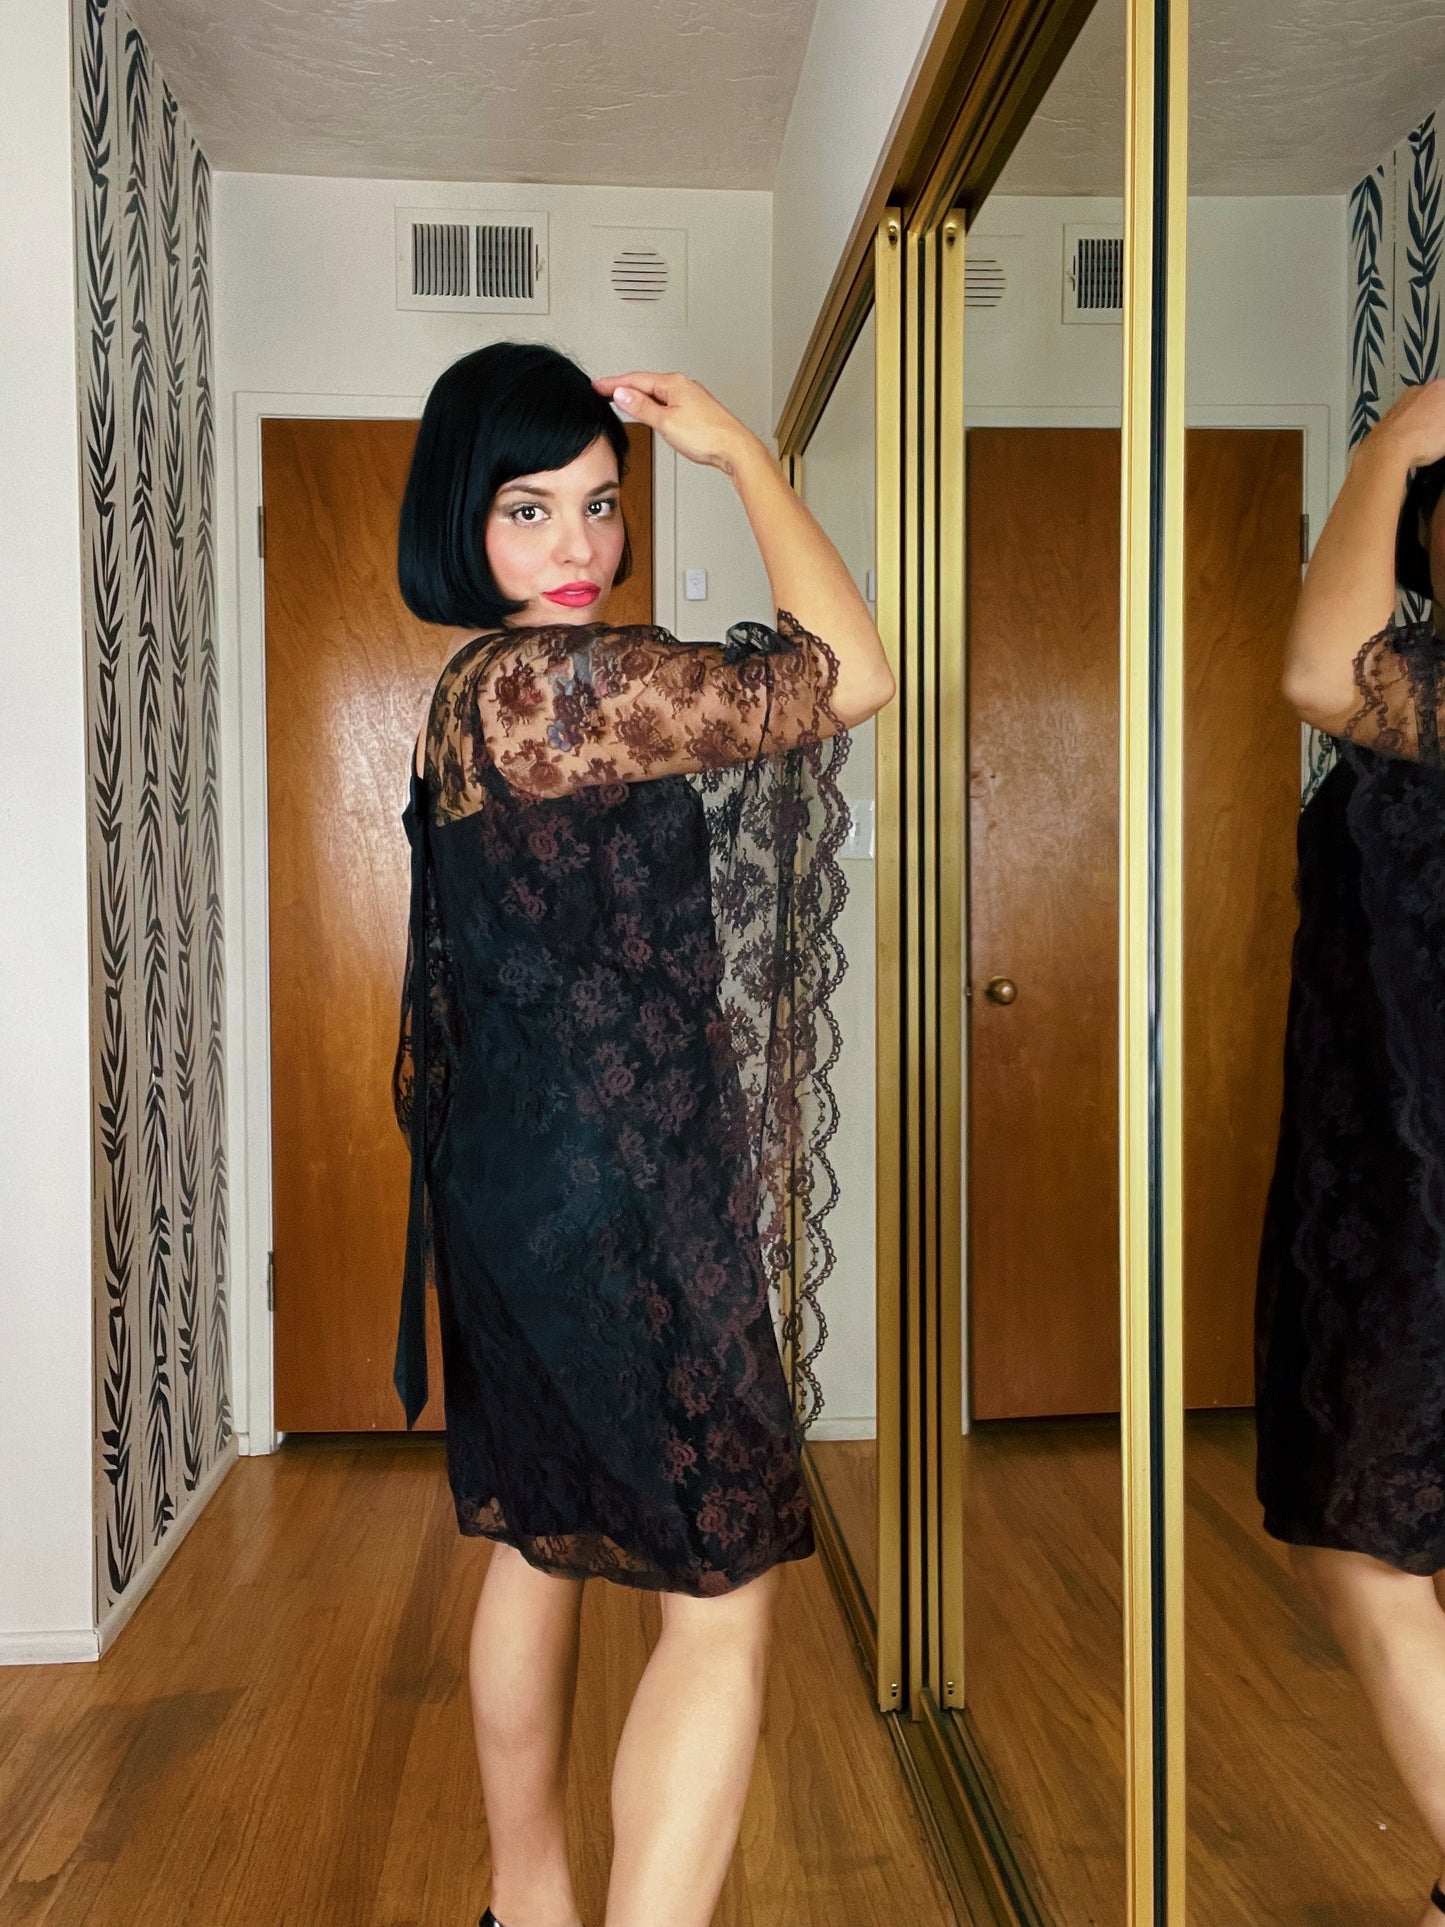 Vintage 60s Batwing Lace Overlay Dress Fits Sizes XS-SM & Possible Size M